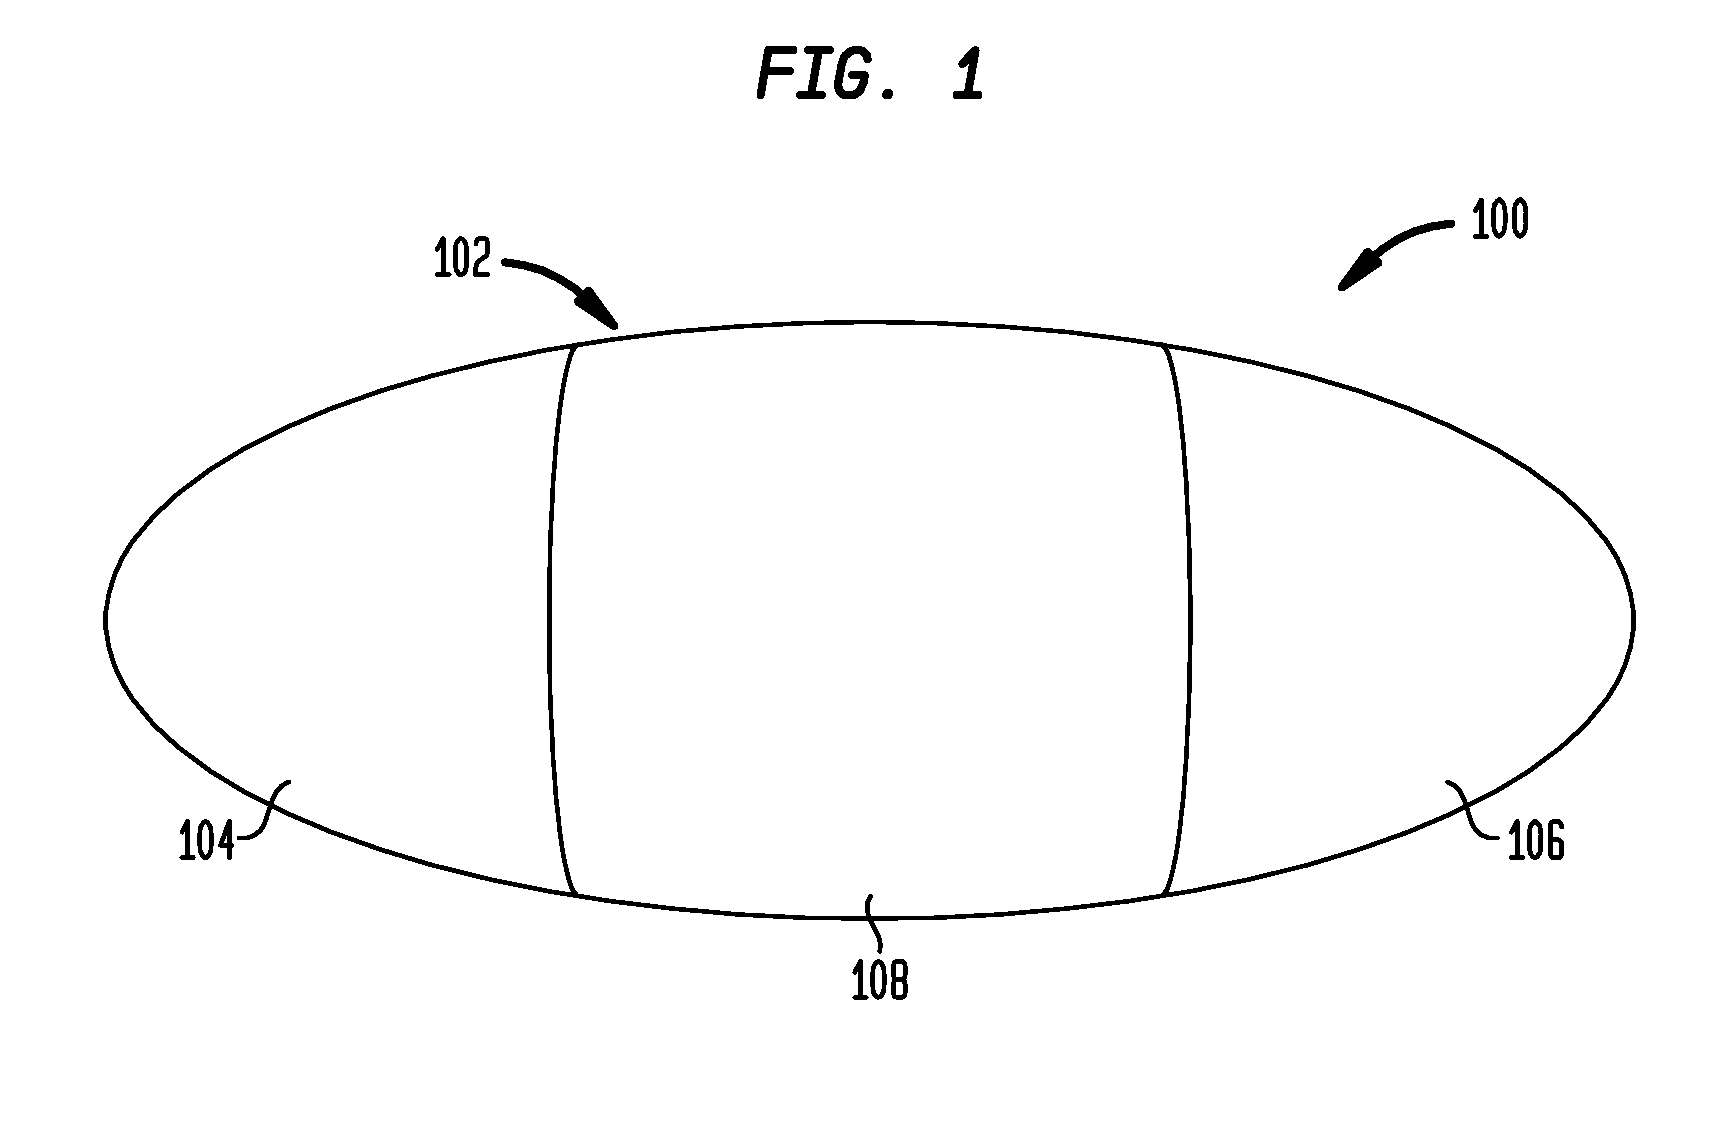 Methods and apparatus for treating gastrointestinal disorders using electrical signals